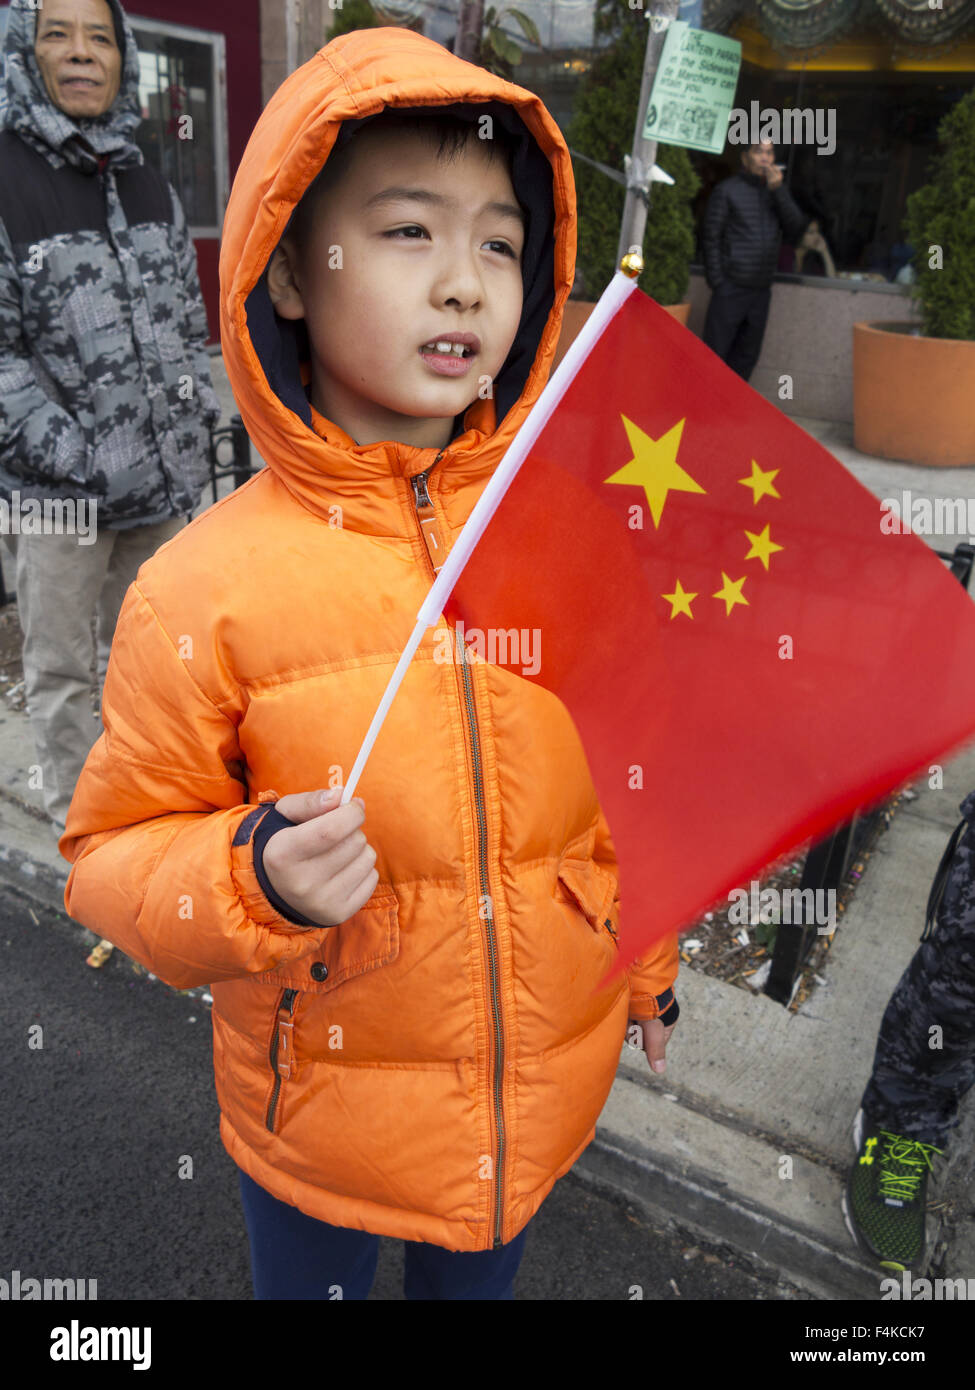 Junge chinesische Flagge China Day Festival und Laternenumzug in Chinatown in Sunset Park in Brooklyn, NY, Oct.18, 20015 hält. Stockfoto